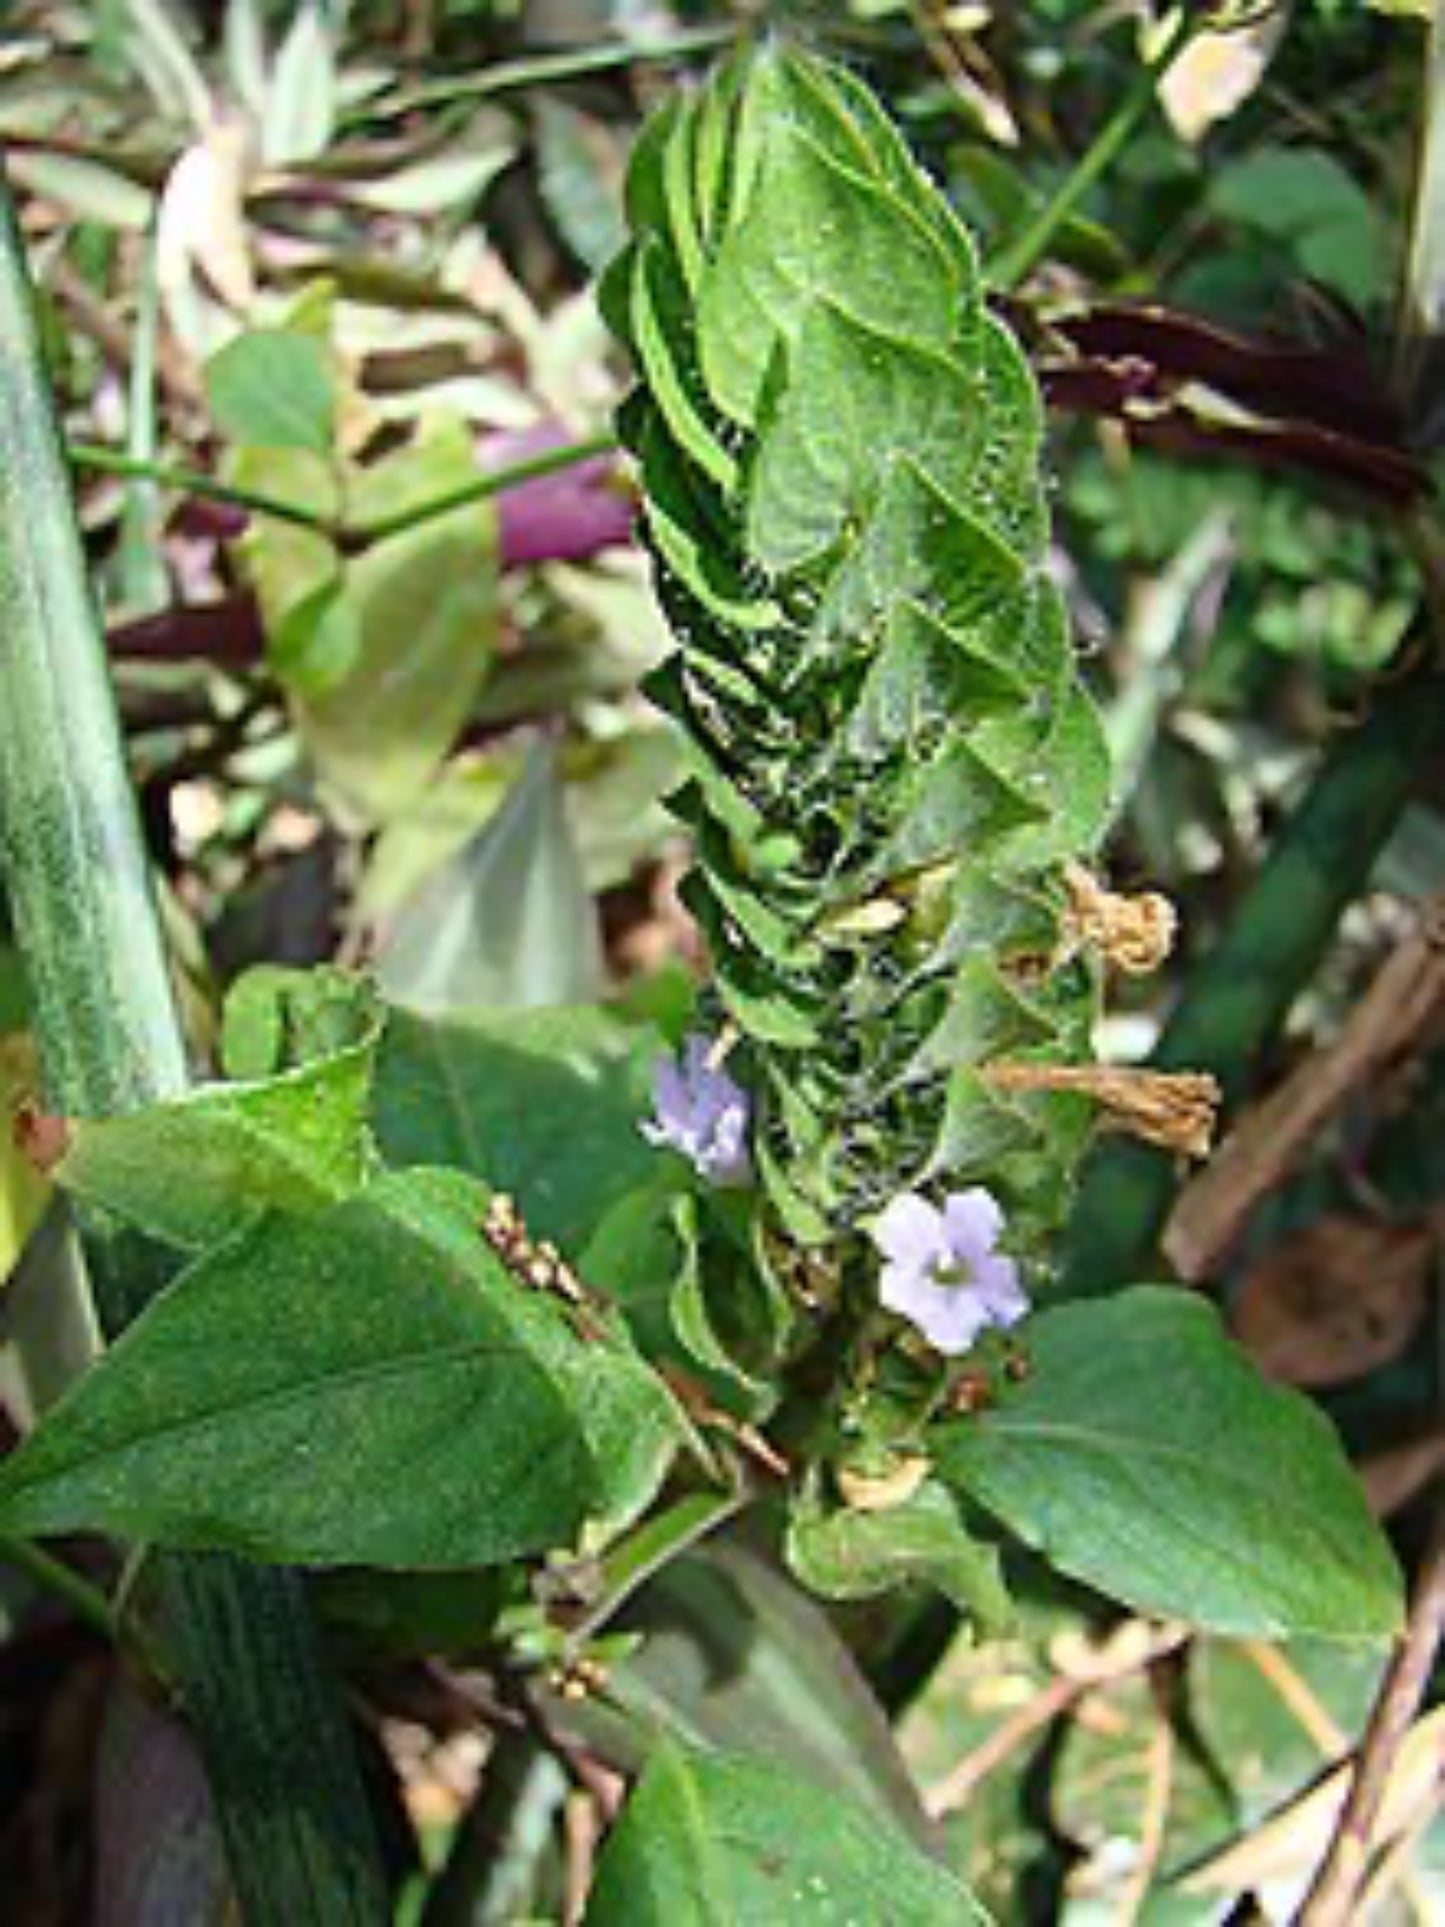 ruellia blechum brownie is the host plant for malachite butterfly